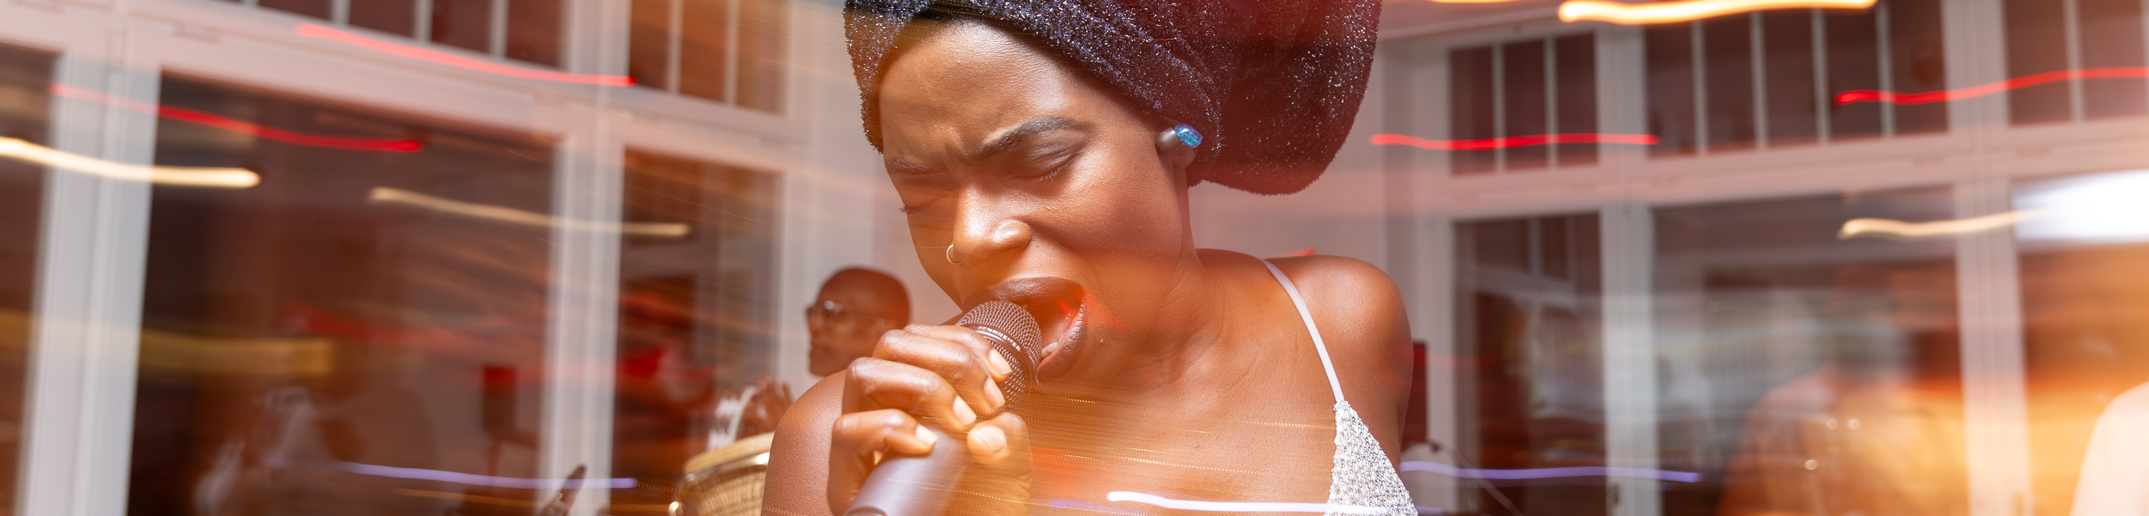 A woman sings into a microphone.